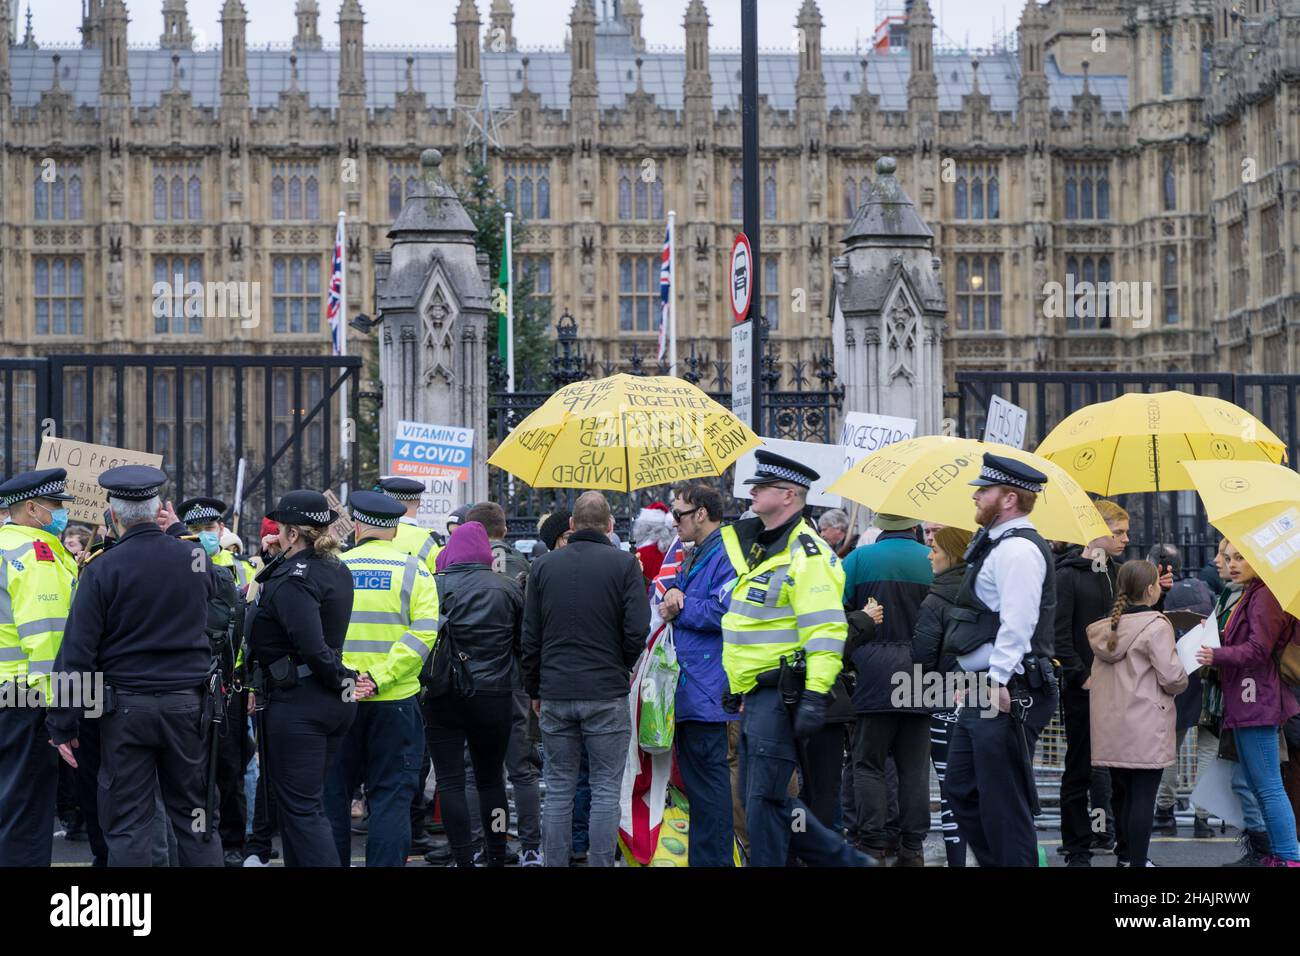 London Westminster UK.  13 December 2021. Protesters gathered outside the House of Parliament holding various messages on placard, with heavy police present keeping law and order. Credit: Xiu Bao/Alamy Live News Stock Photo